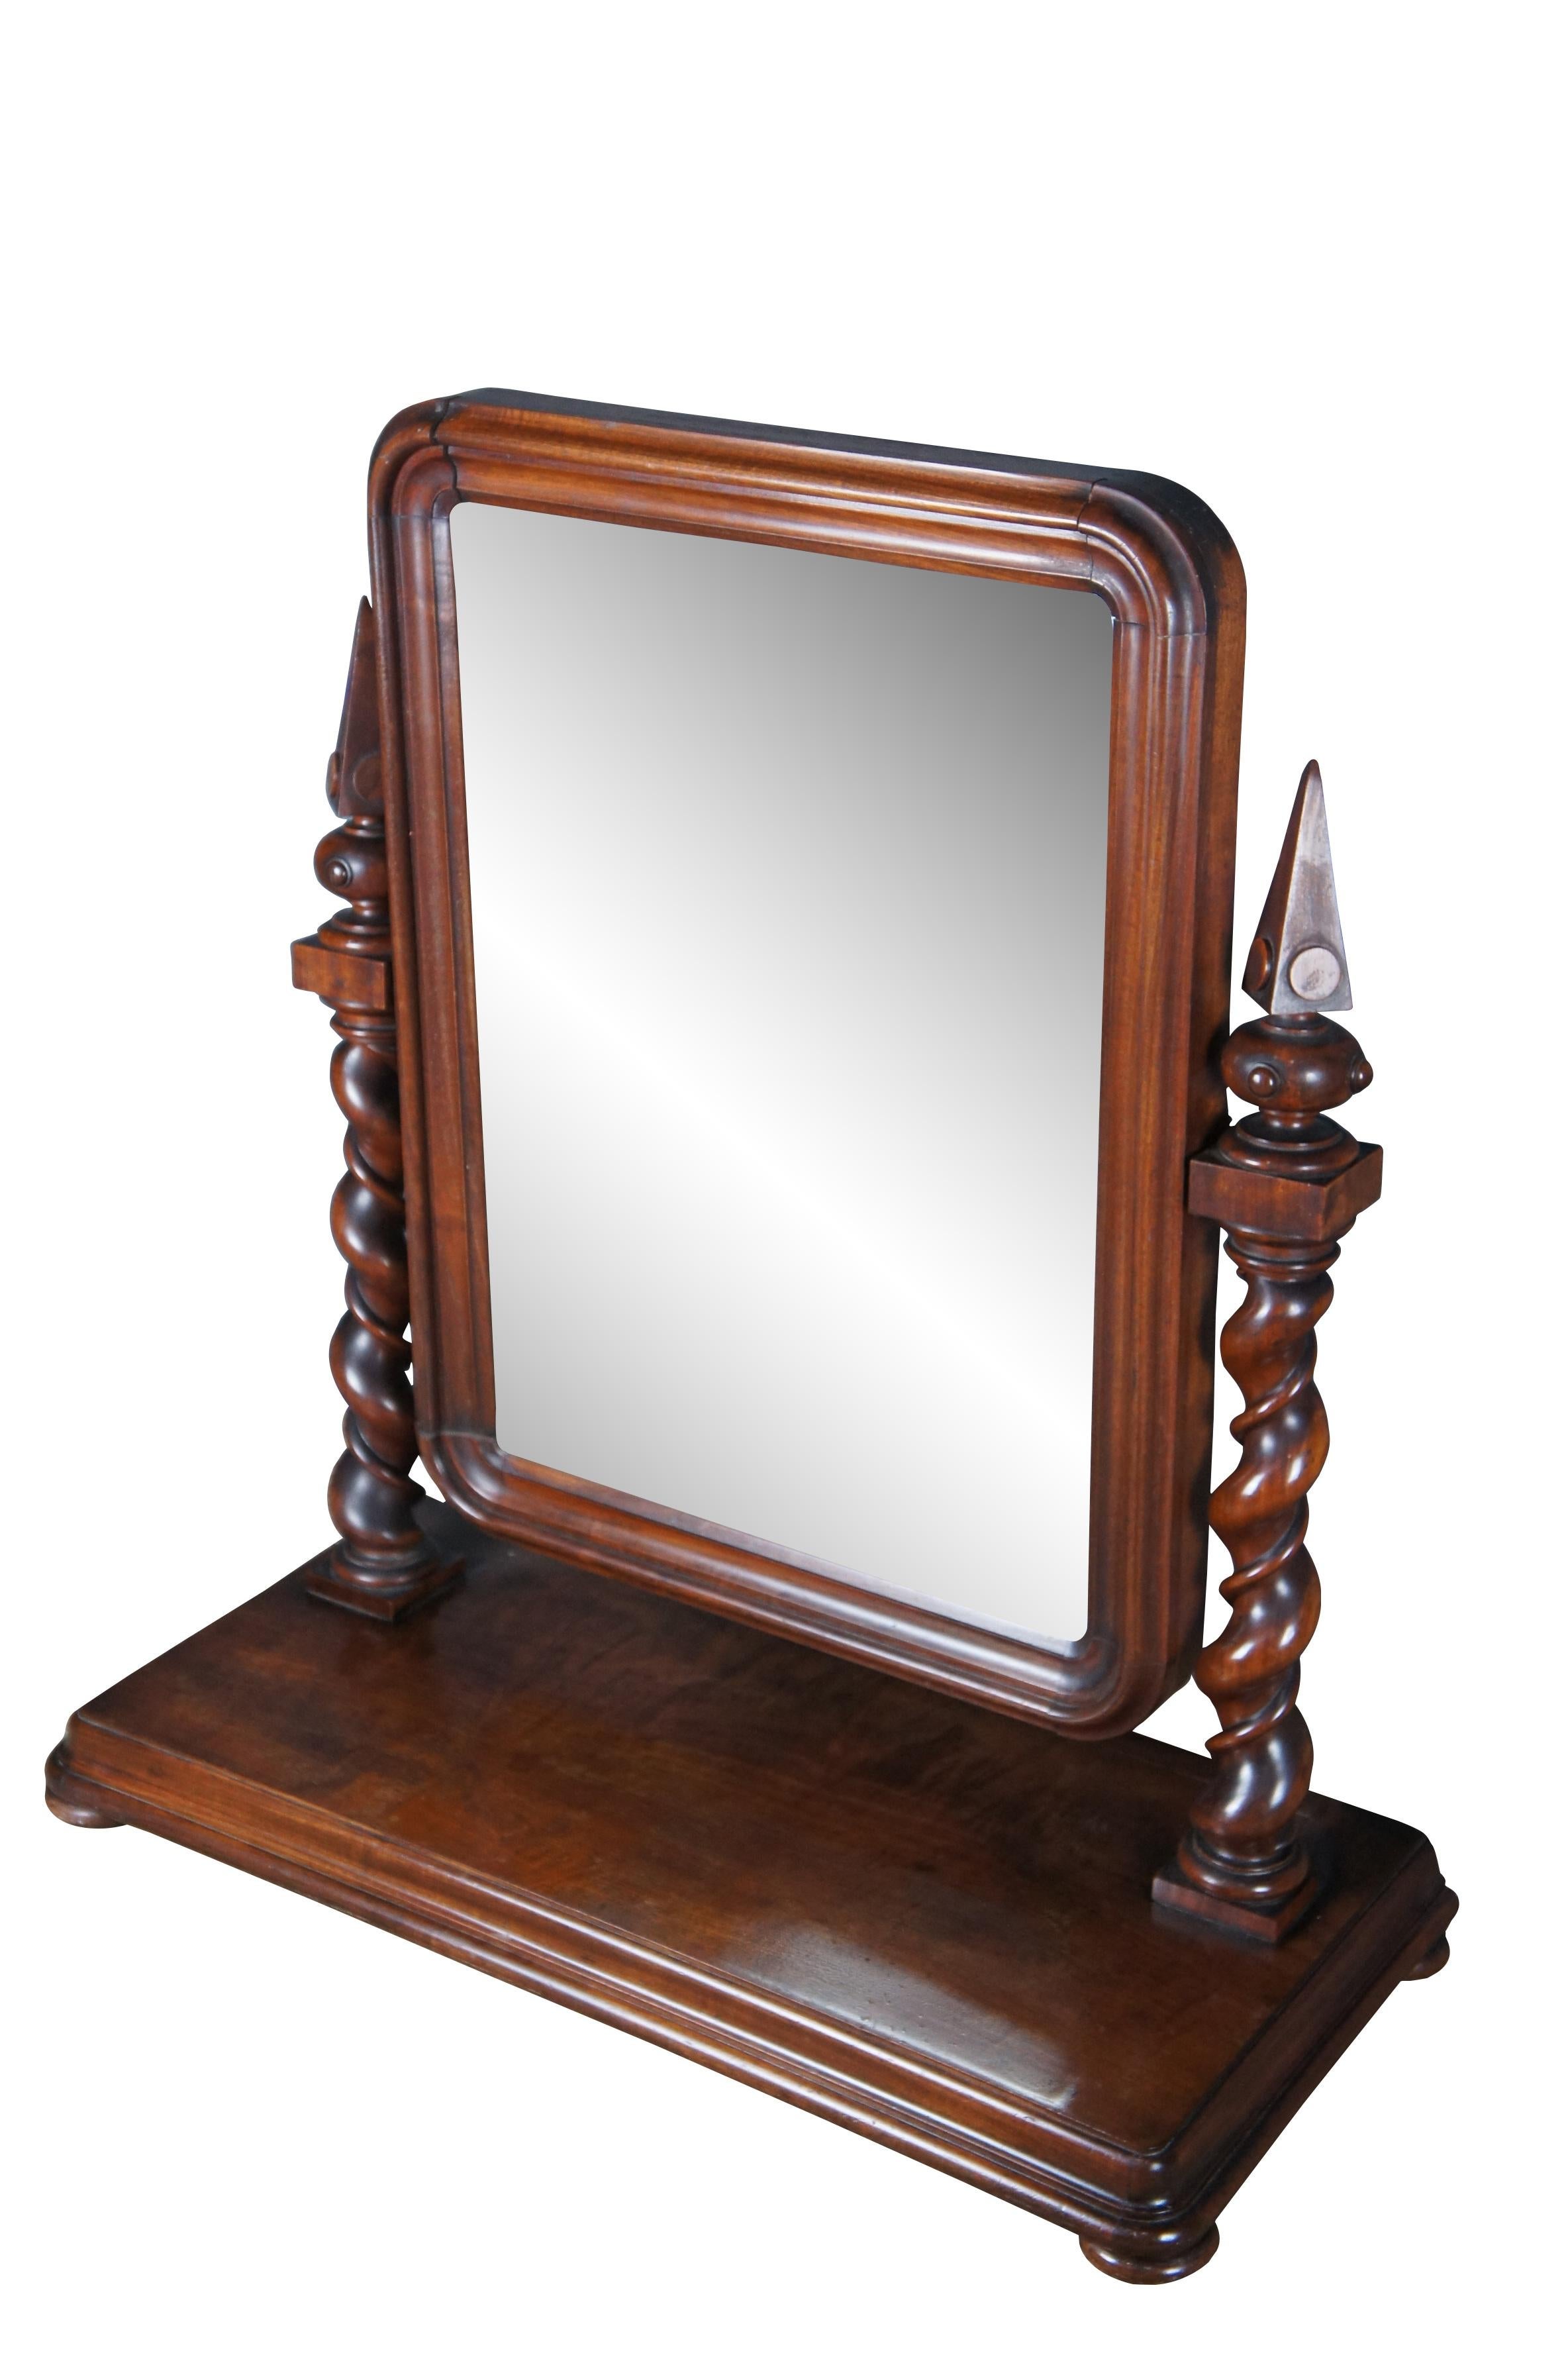 Antique 19th Century English Mahogany Empire Gentlemans Dressing Shaving Mirror  In Good Condition For Sale In Dayton, OH